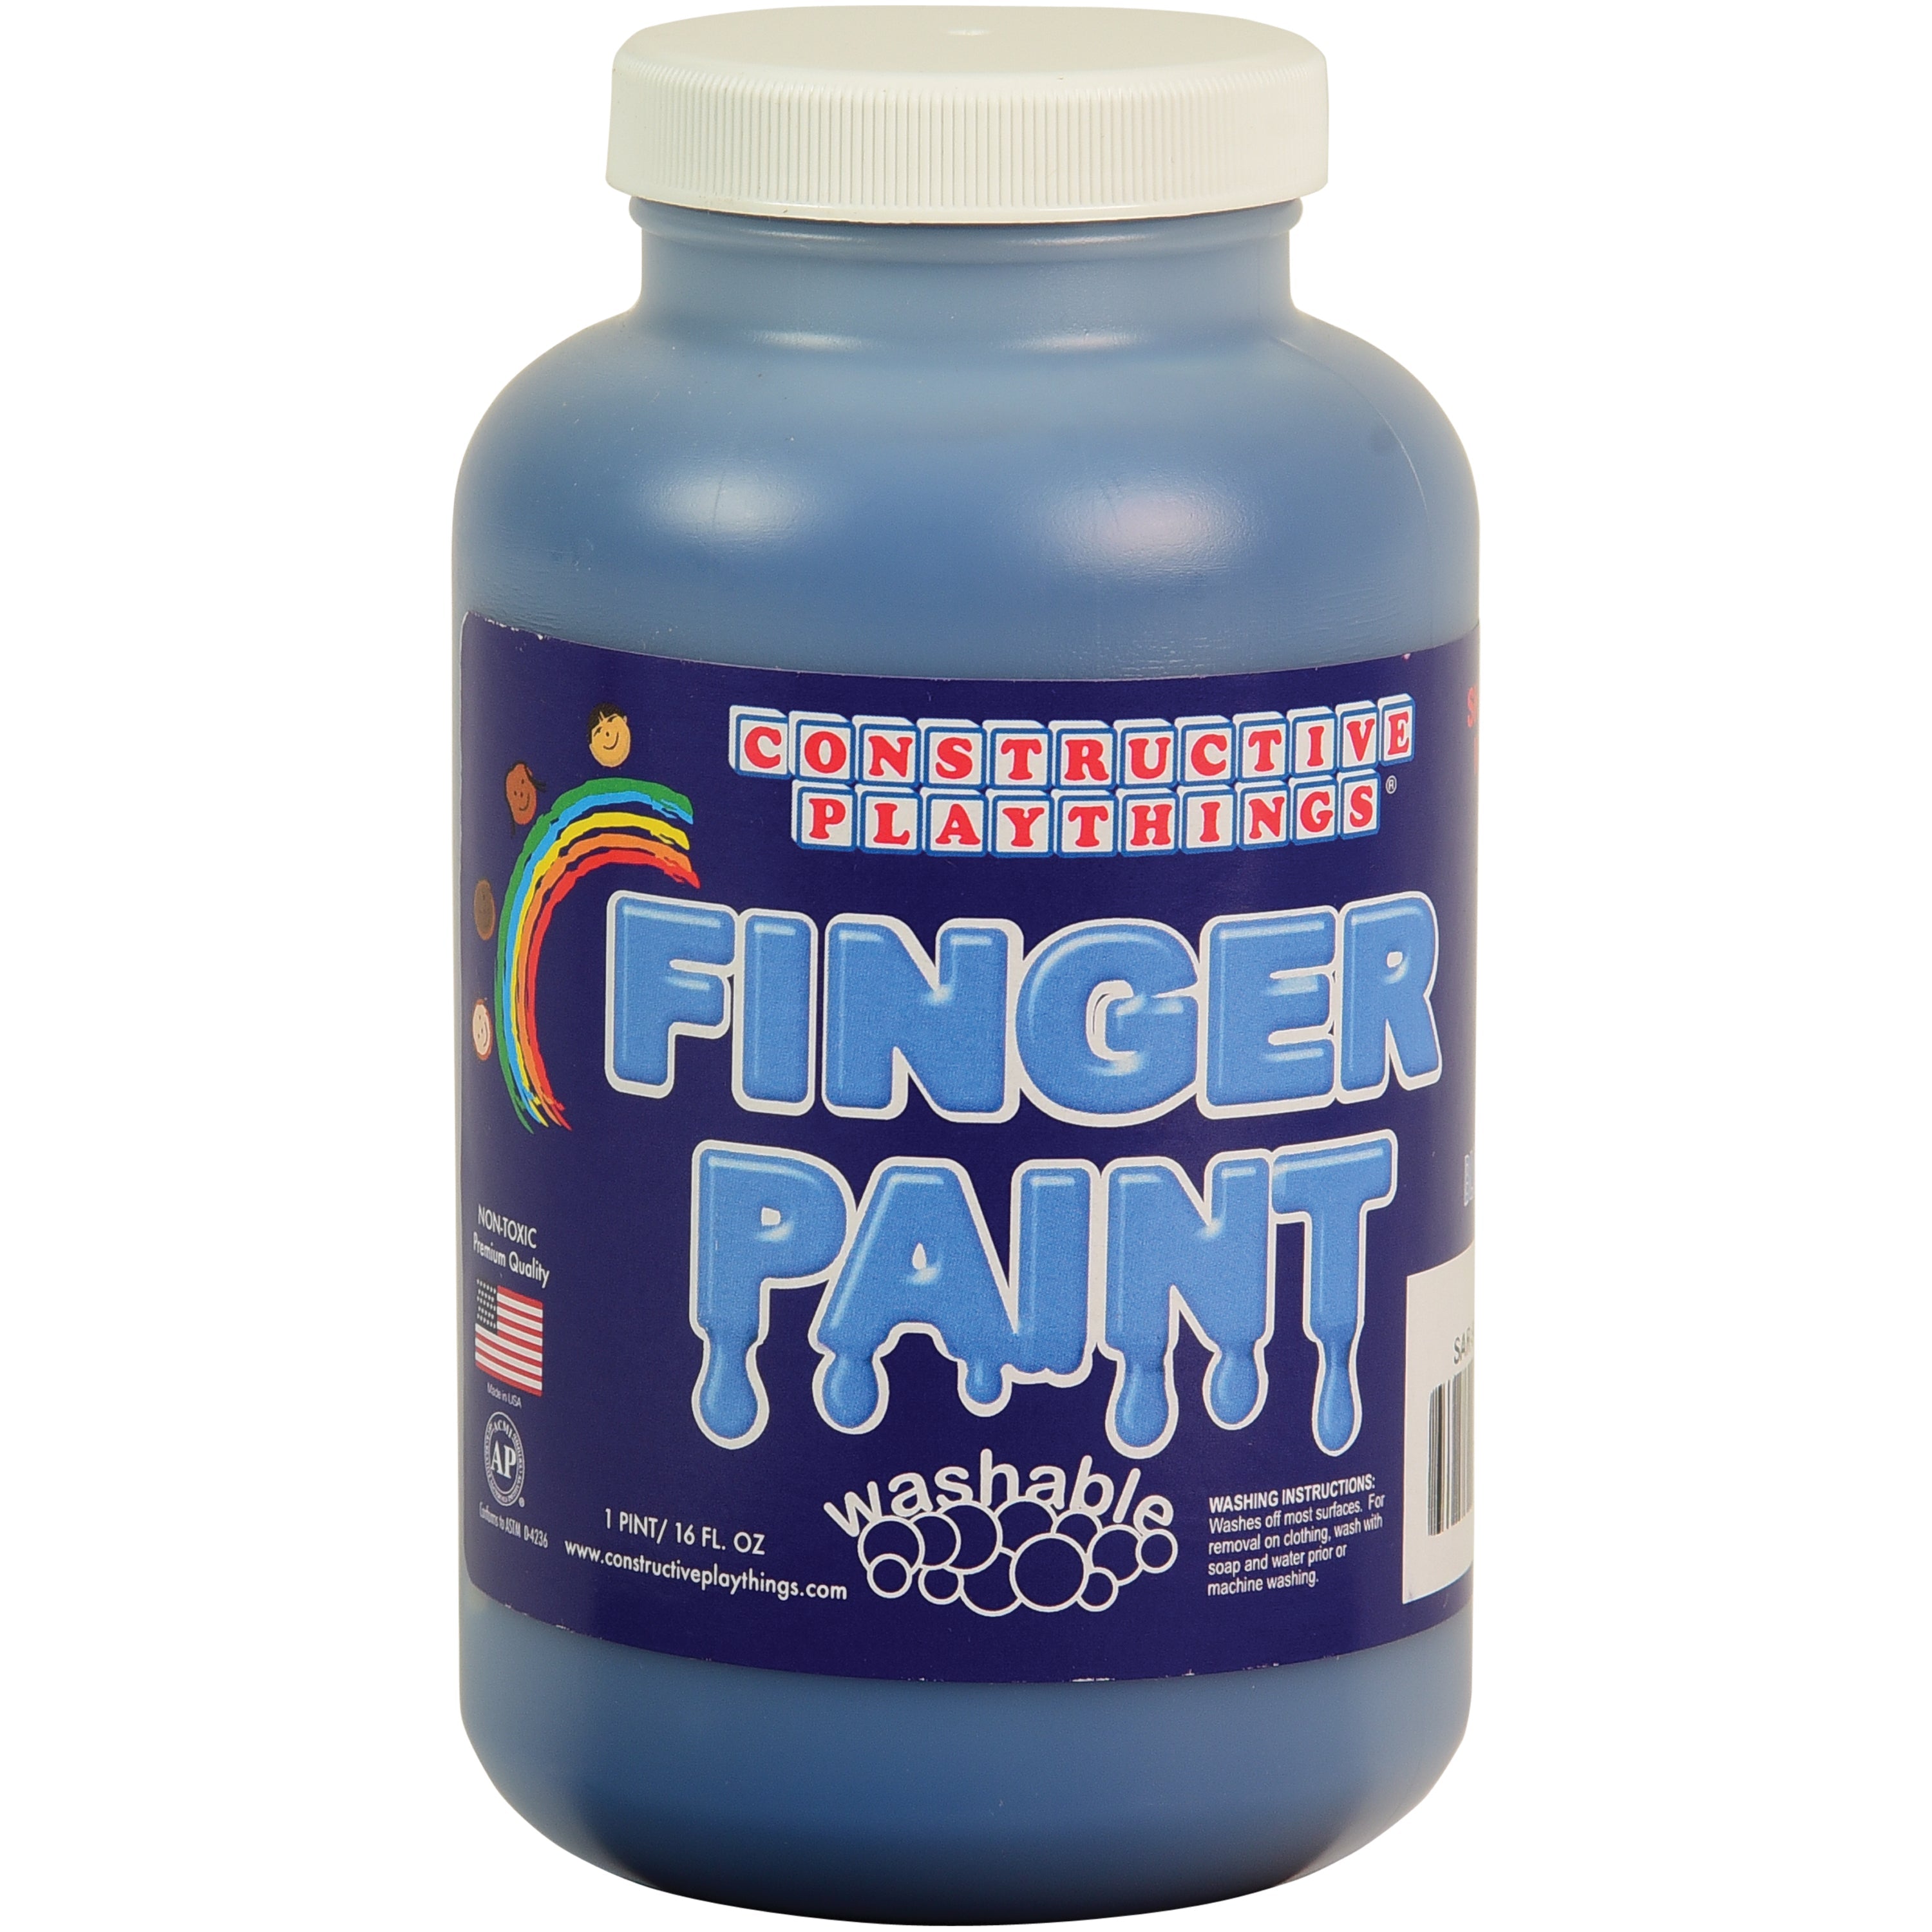 Constructive Playthings® Blue Washable Finger Paint - Pint